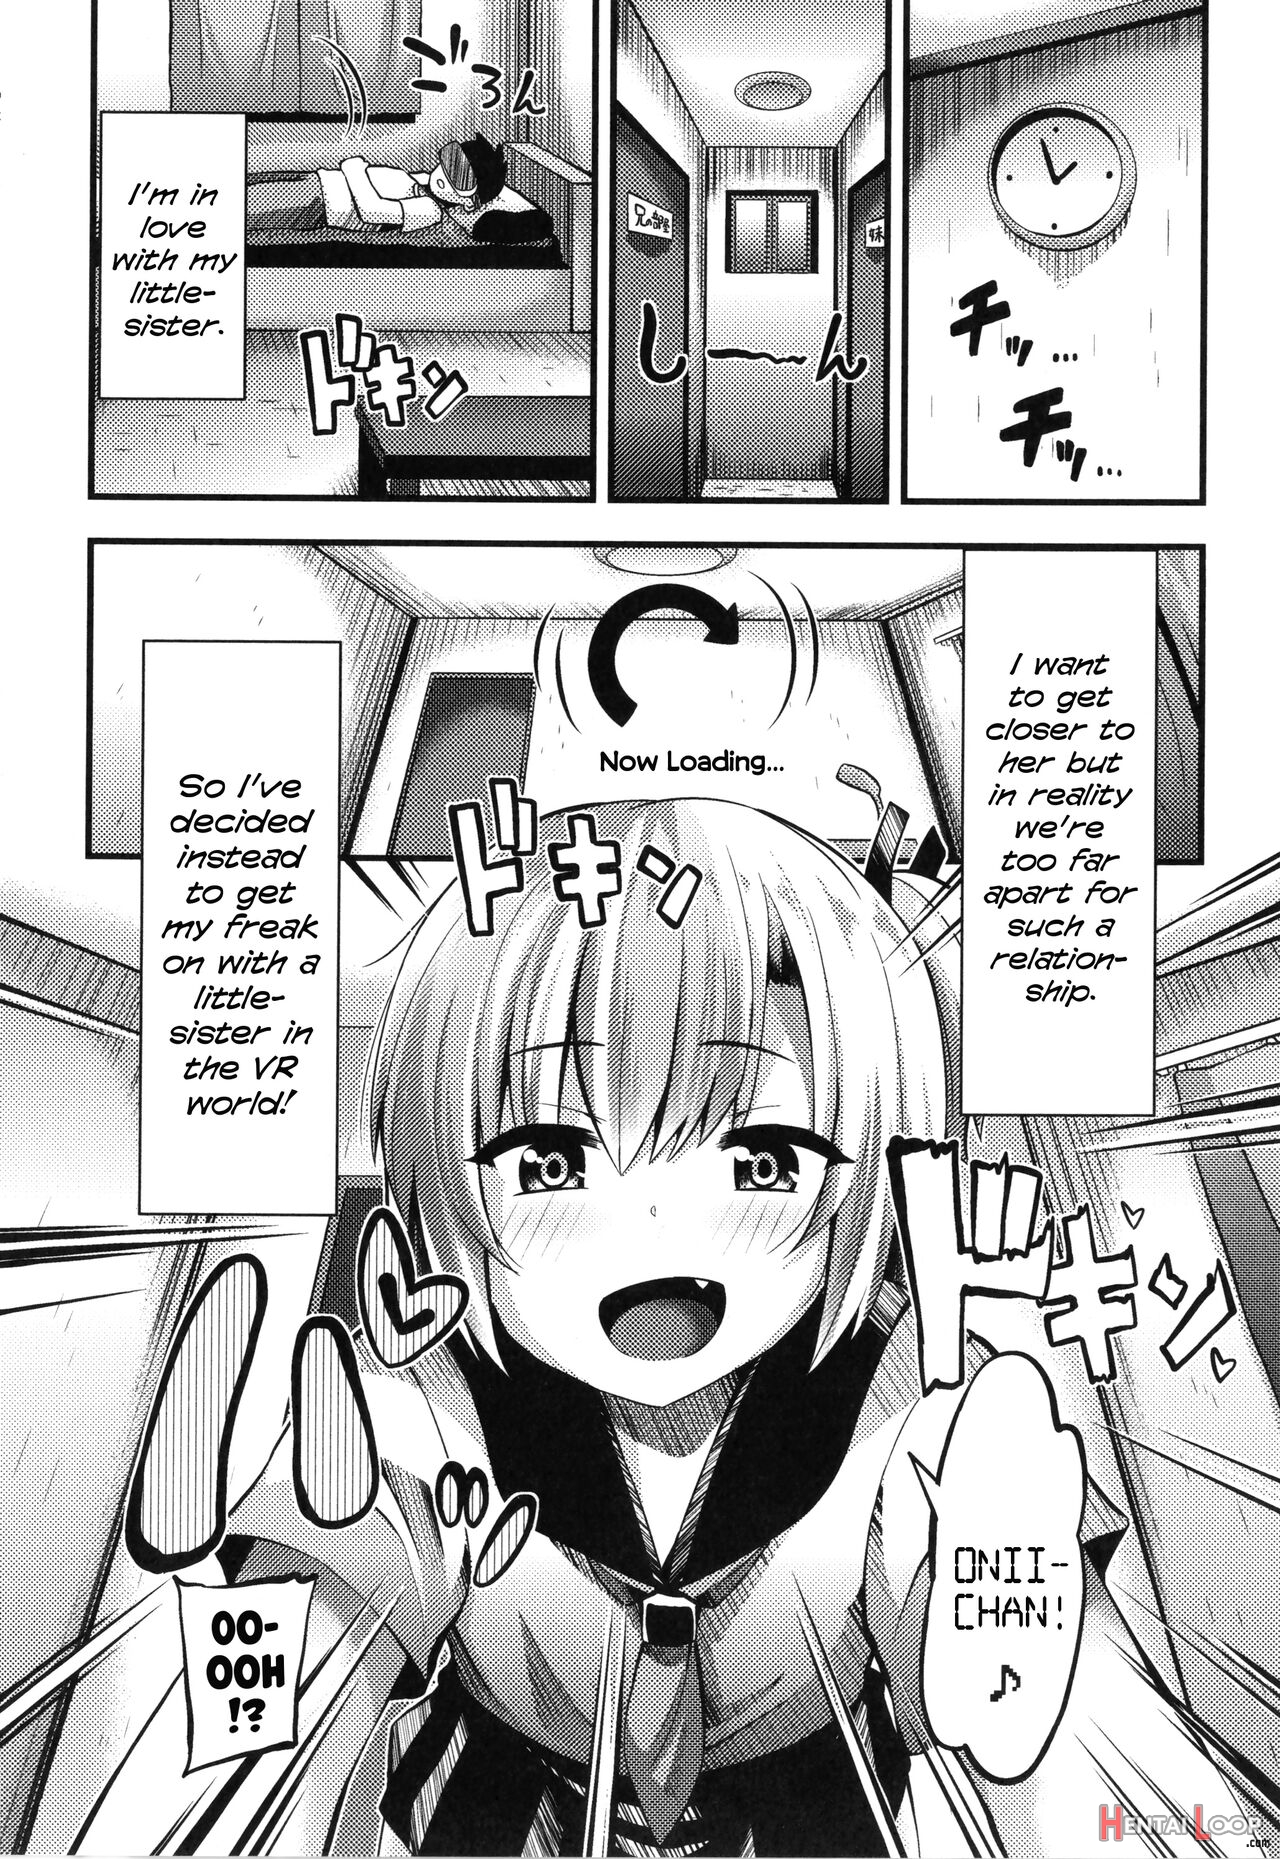 My Vr Little-sister Is Just Around The Corner page 4